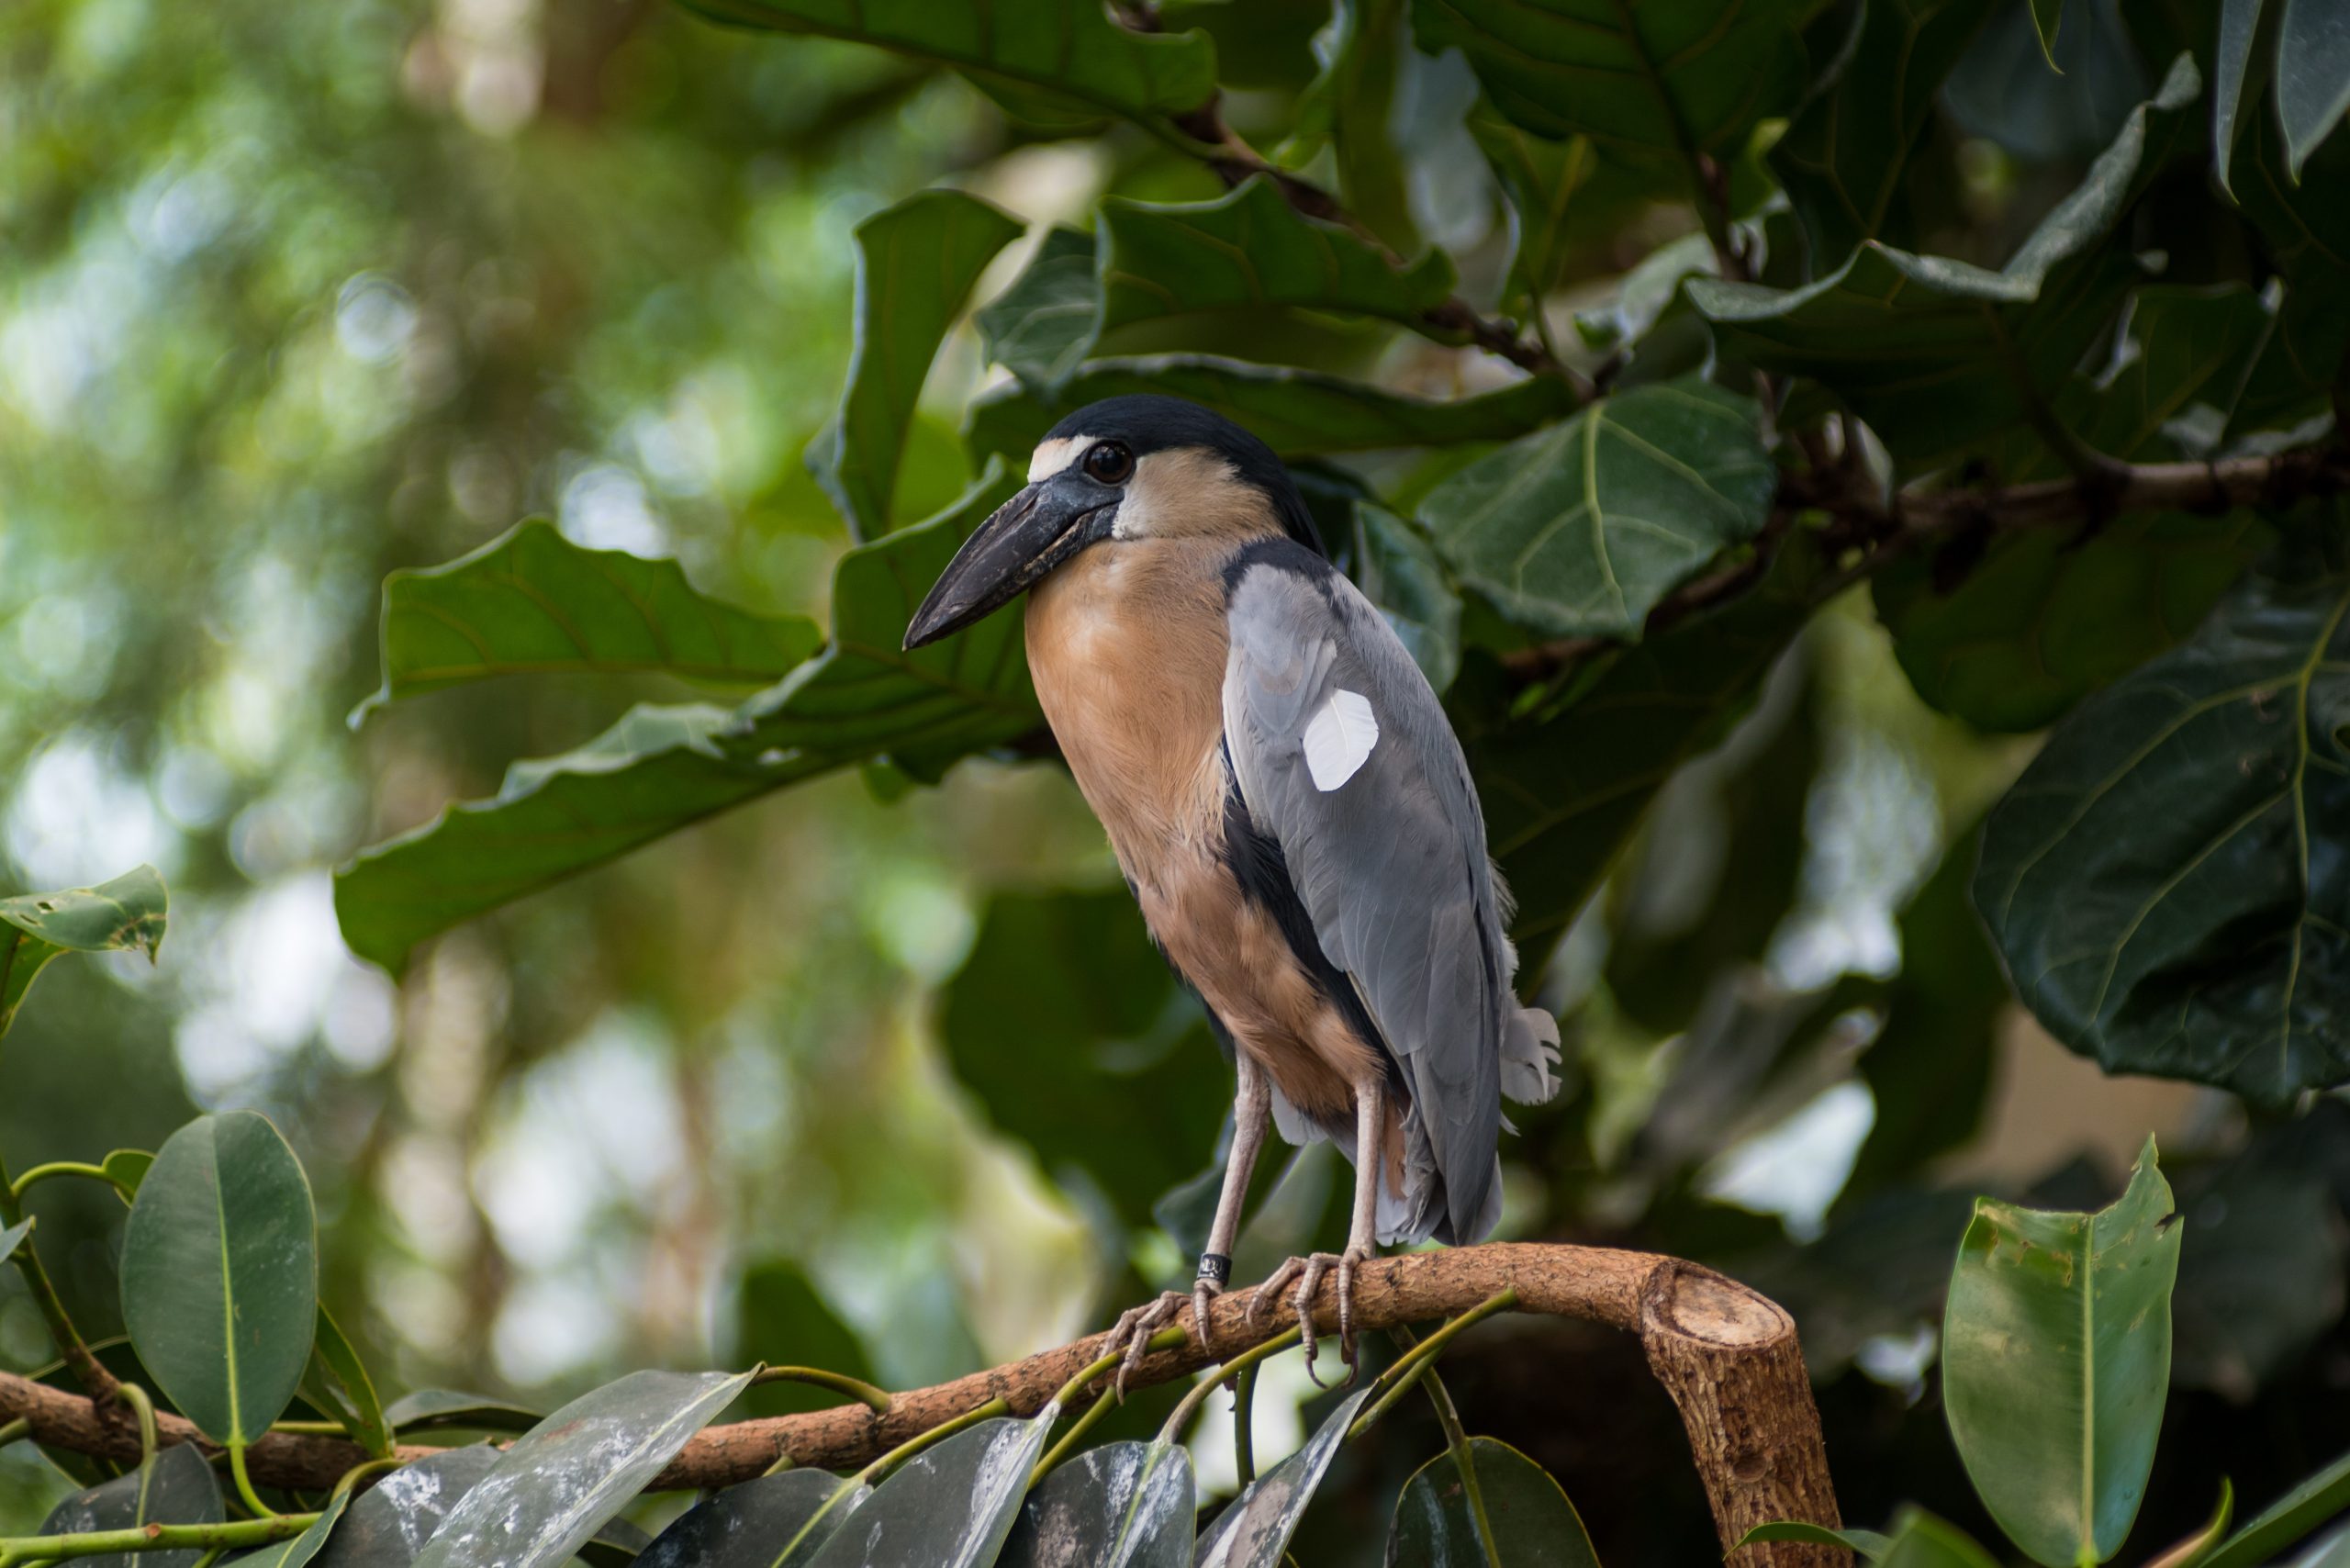 A Boat-billed Heron perched on a branch